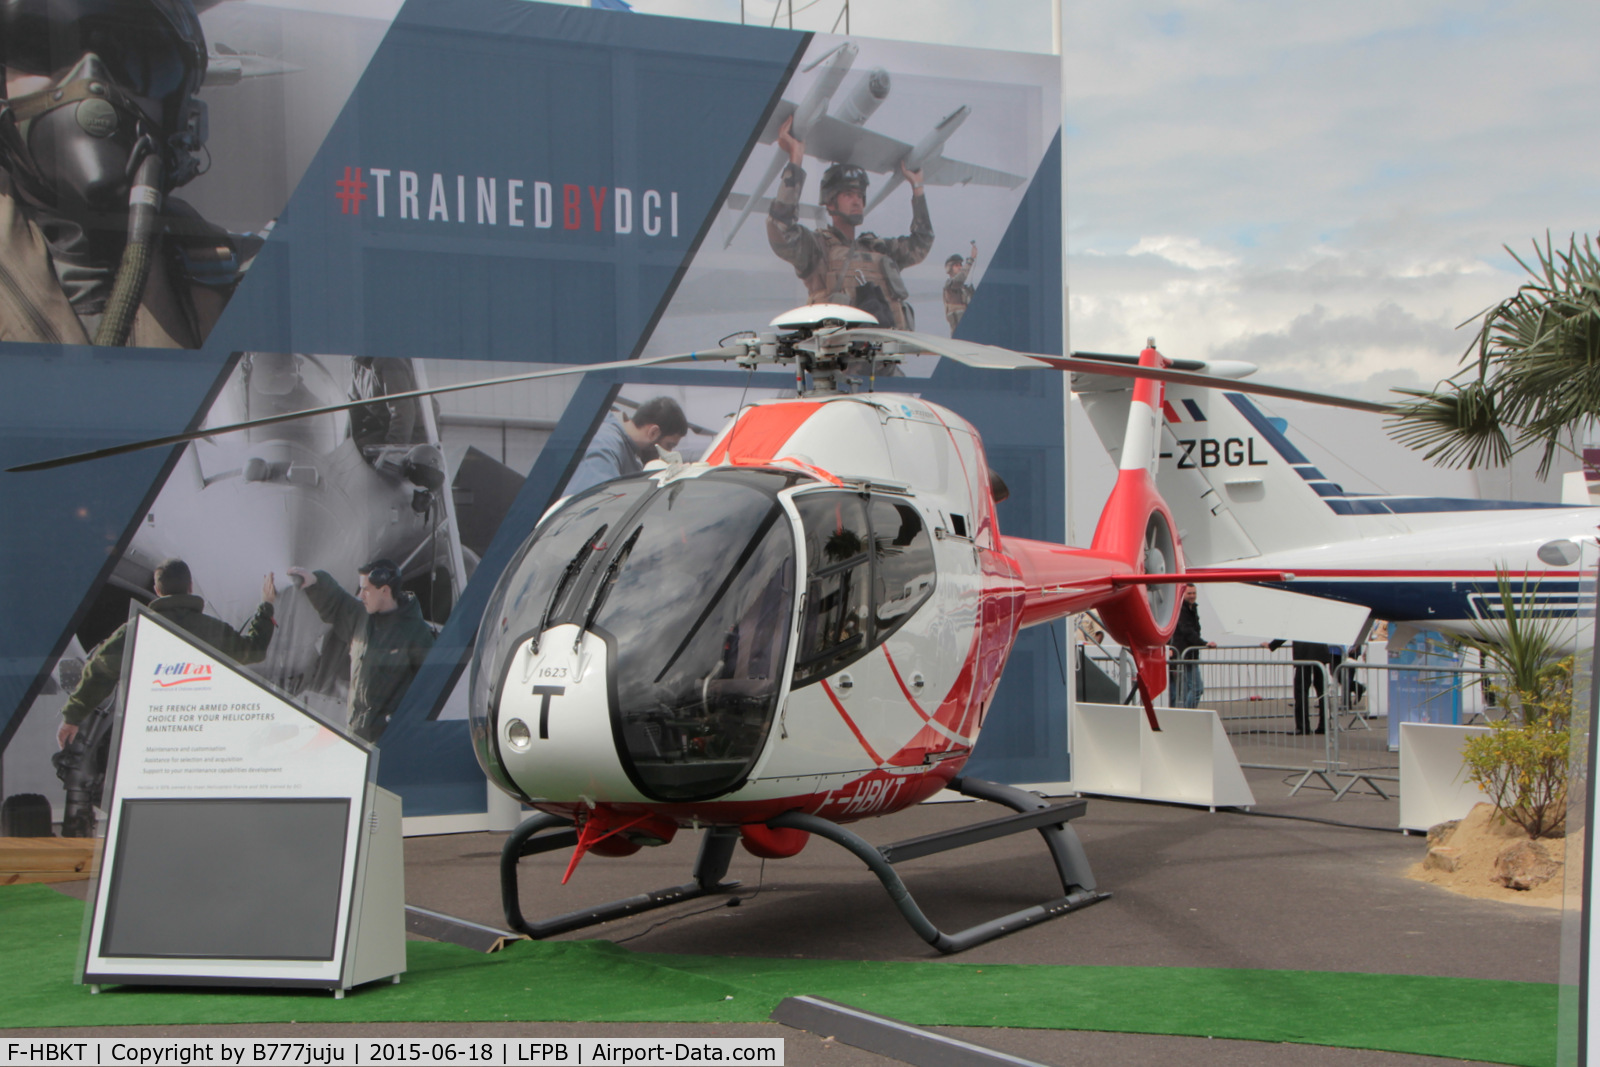 F-HBKT, 2009 Eurocopter EC-120B Colibri C/N 1623, at Le Bourget for SIAE 2015